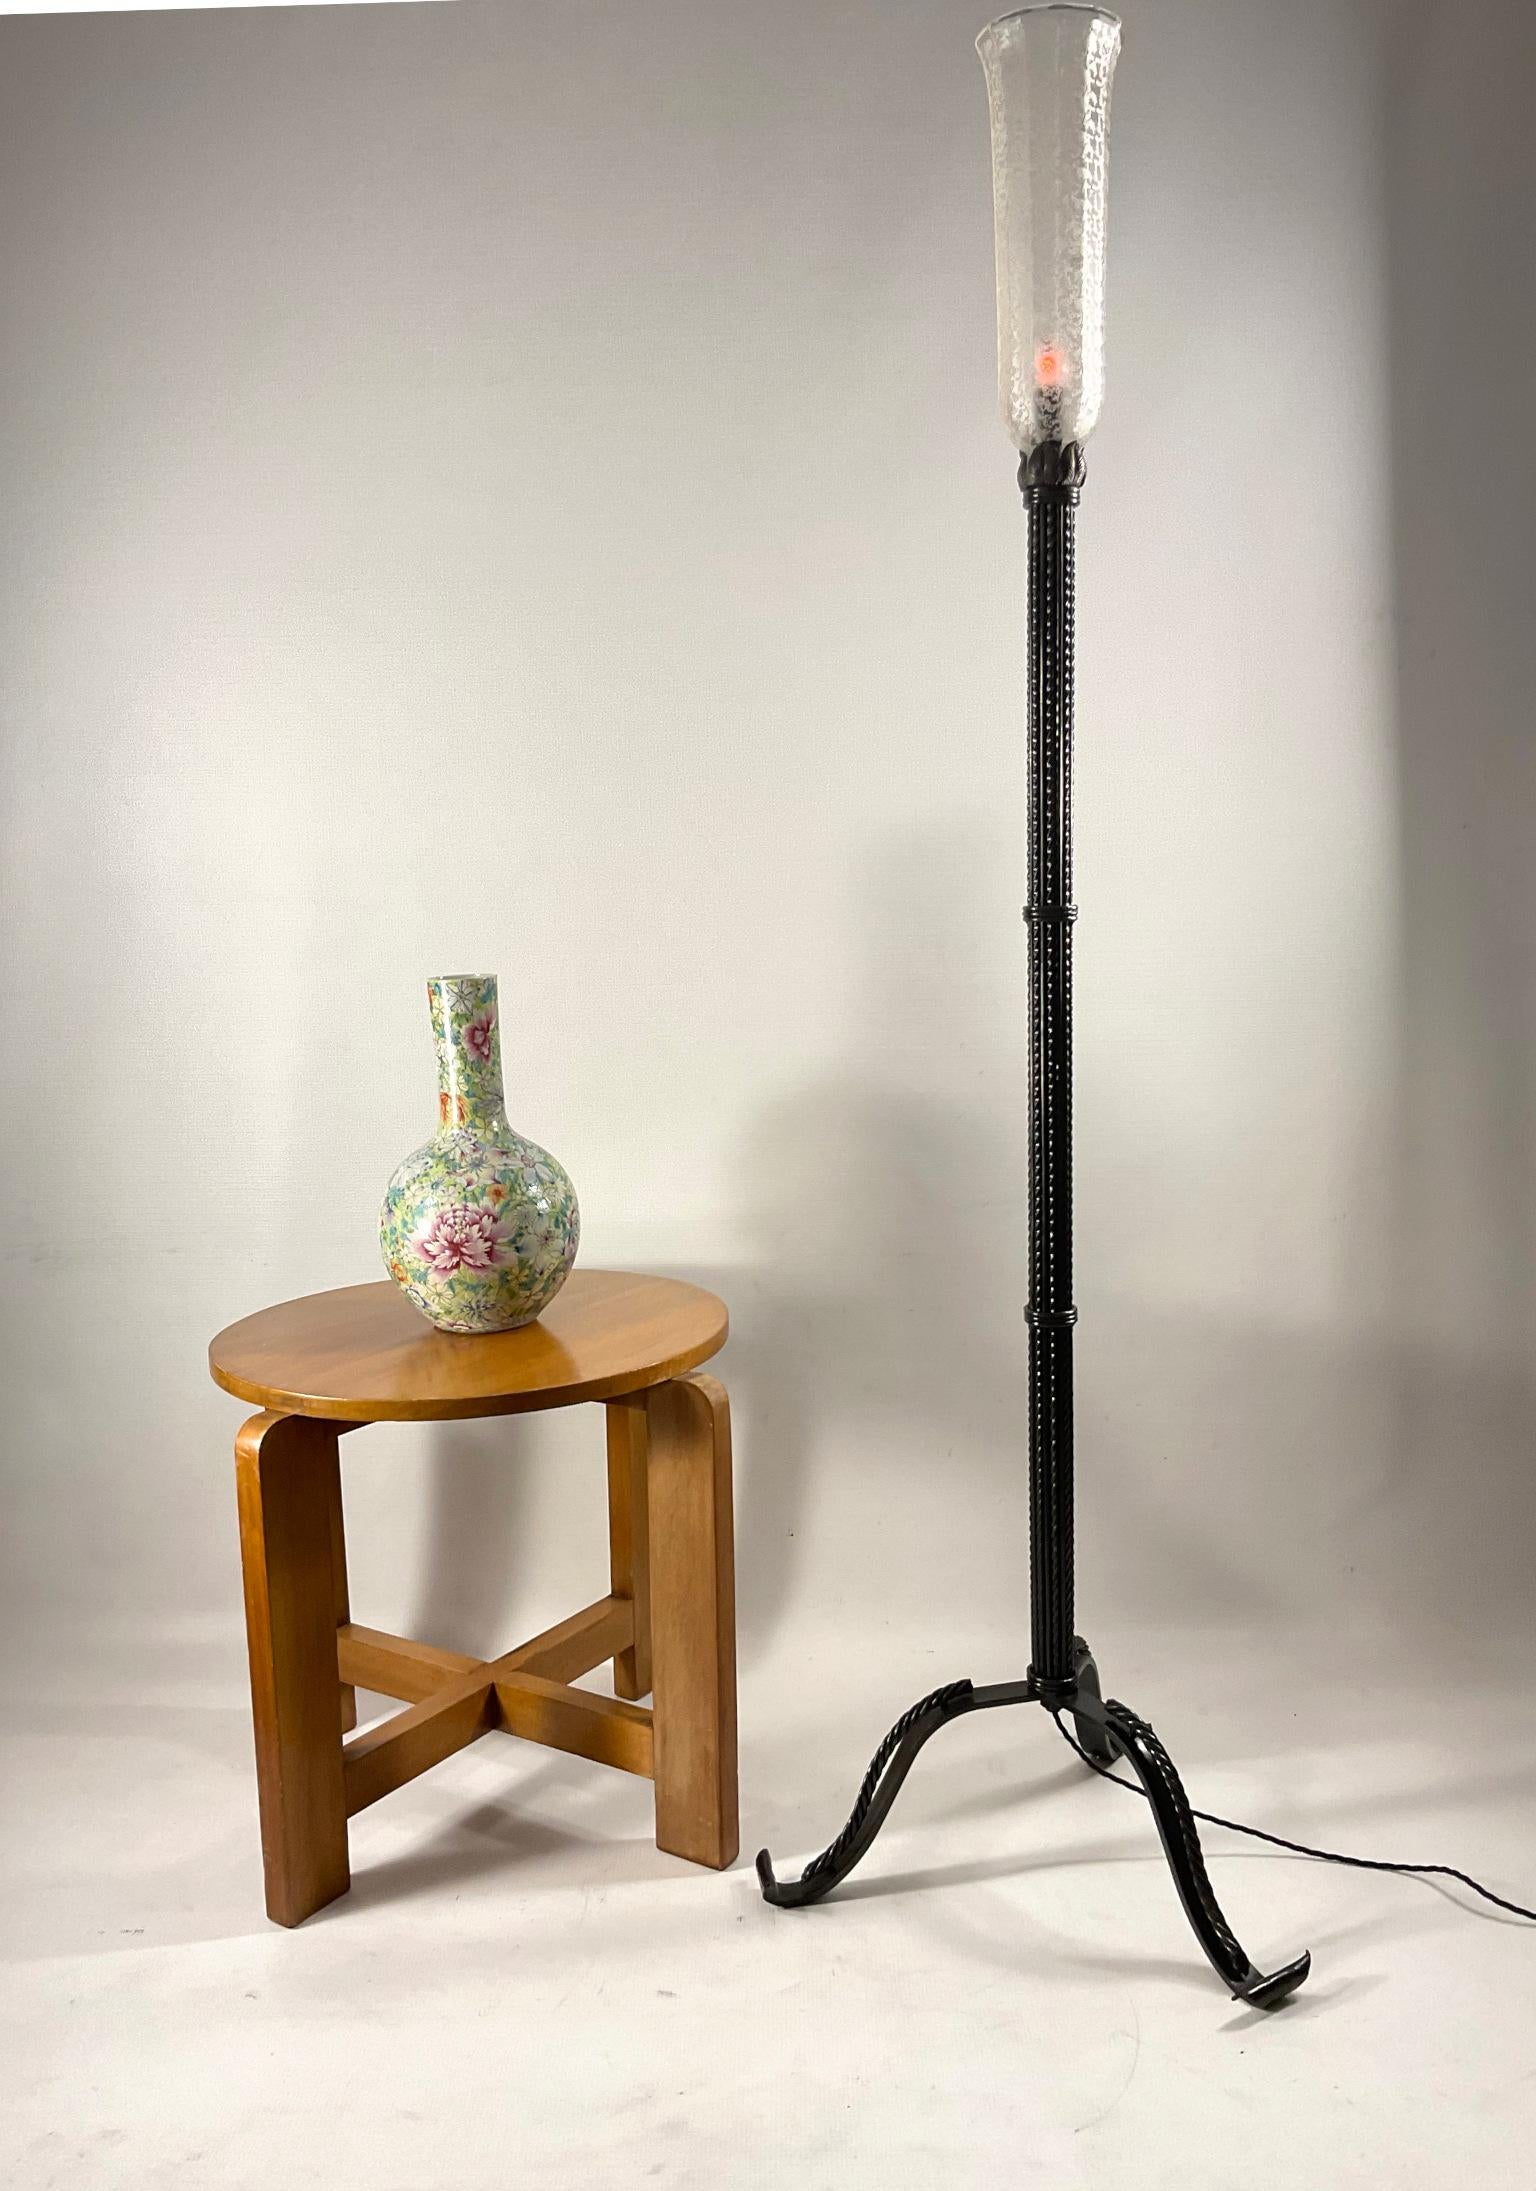 1920s French Art Deco Wrought Iron Floor Lamp with Frosted Glass Shade For Sale 7